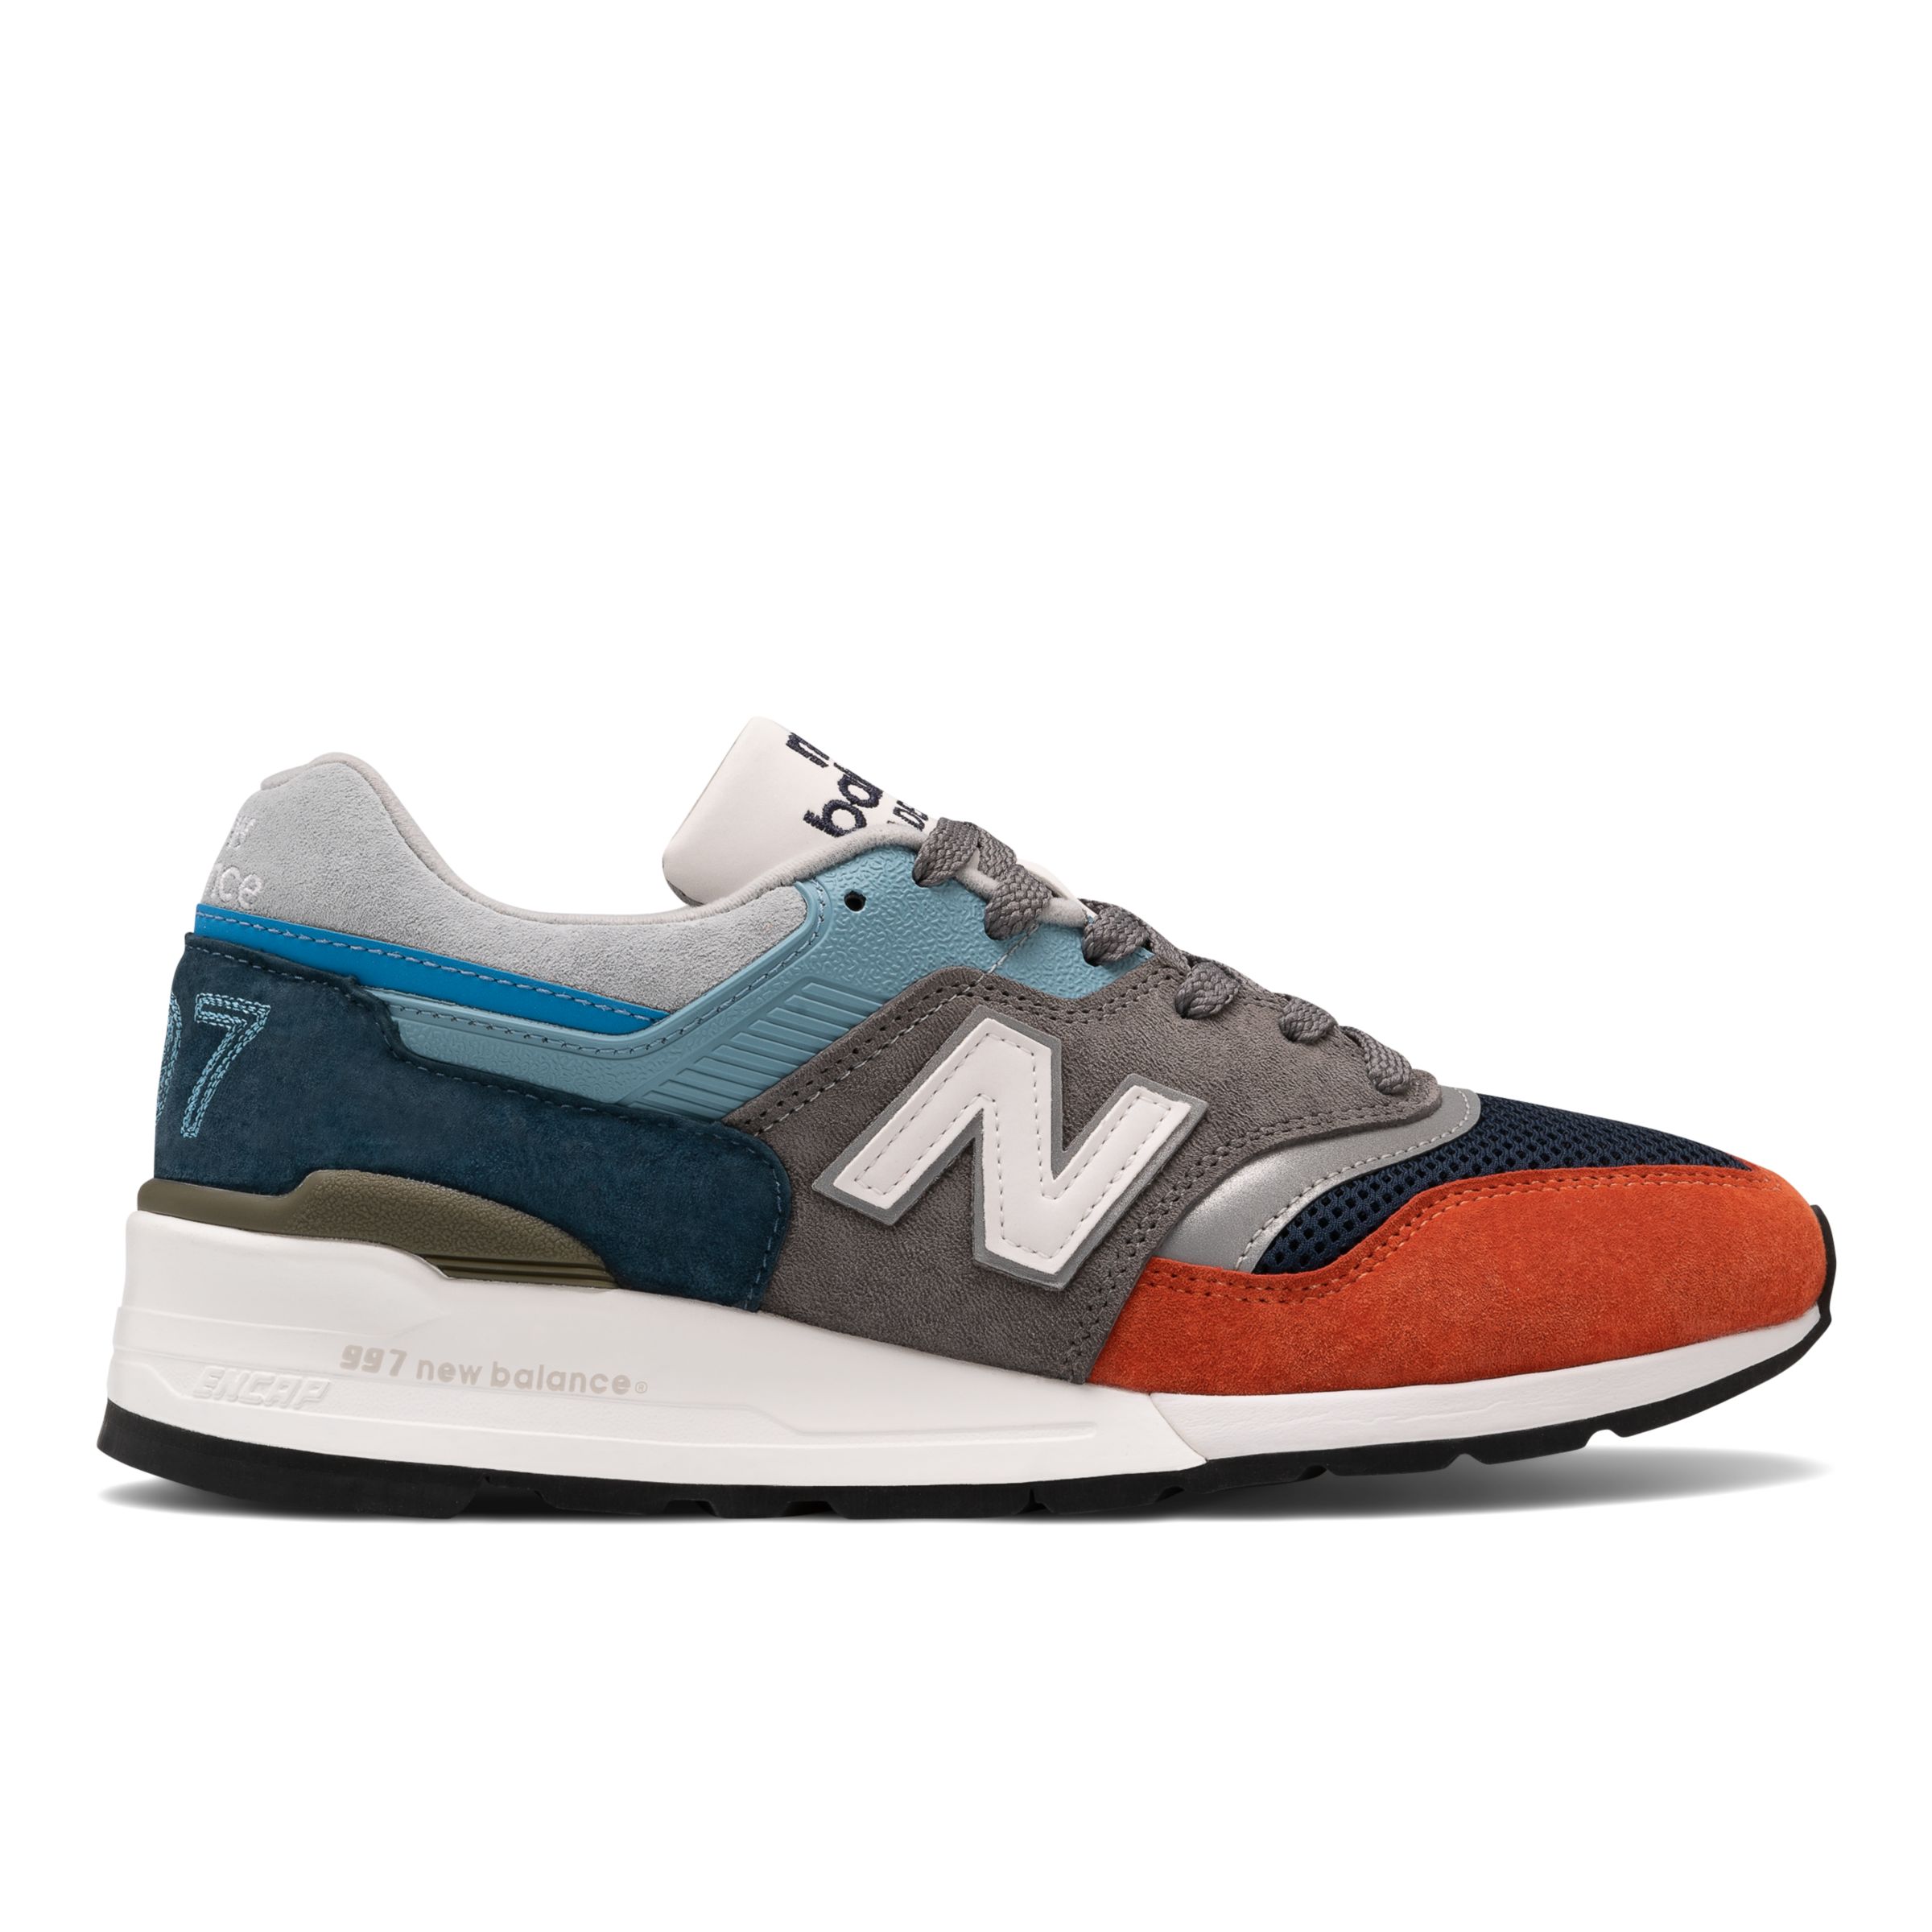 Men's Made in US 997 Lifestyle shoes ML997V1-28115-M